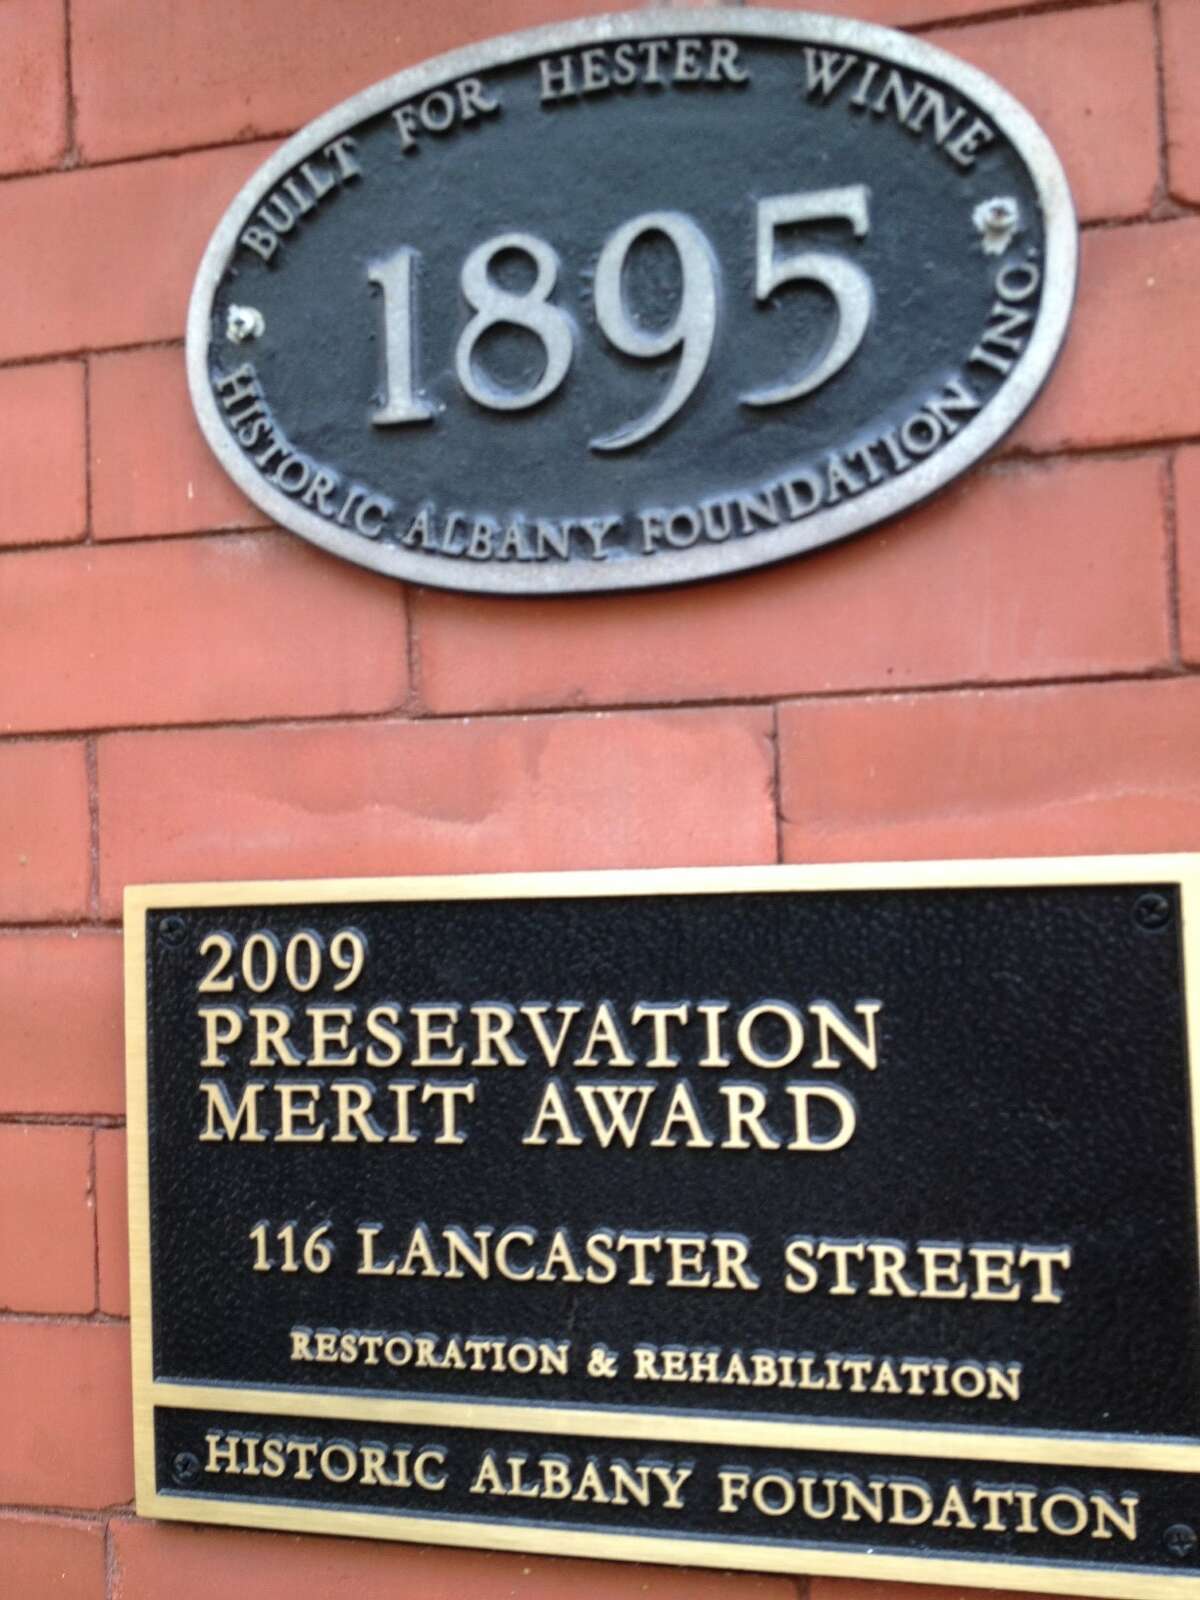 Historic plaque and preservation award on home of Tony and Bonnie Mariano at 116 Lancaster St. in Albany's Center Square that was built in 1895 by Hester Slingerland Winne, a descendant of the Slingerlands, one of the earliest Dutch settlers. (Paul Grondahl / Times Union)